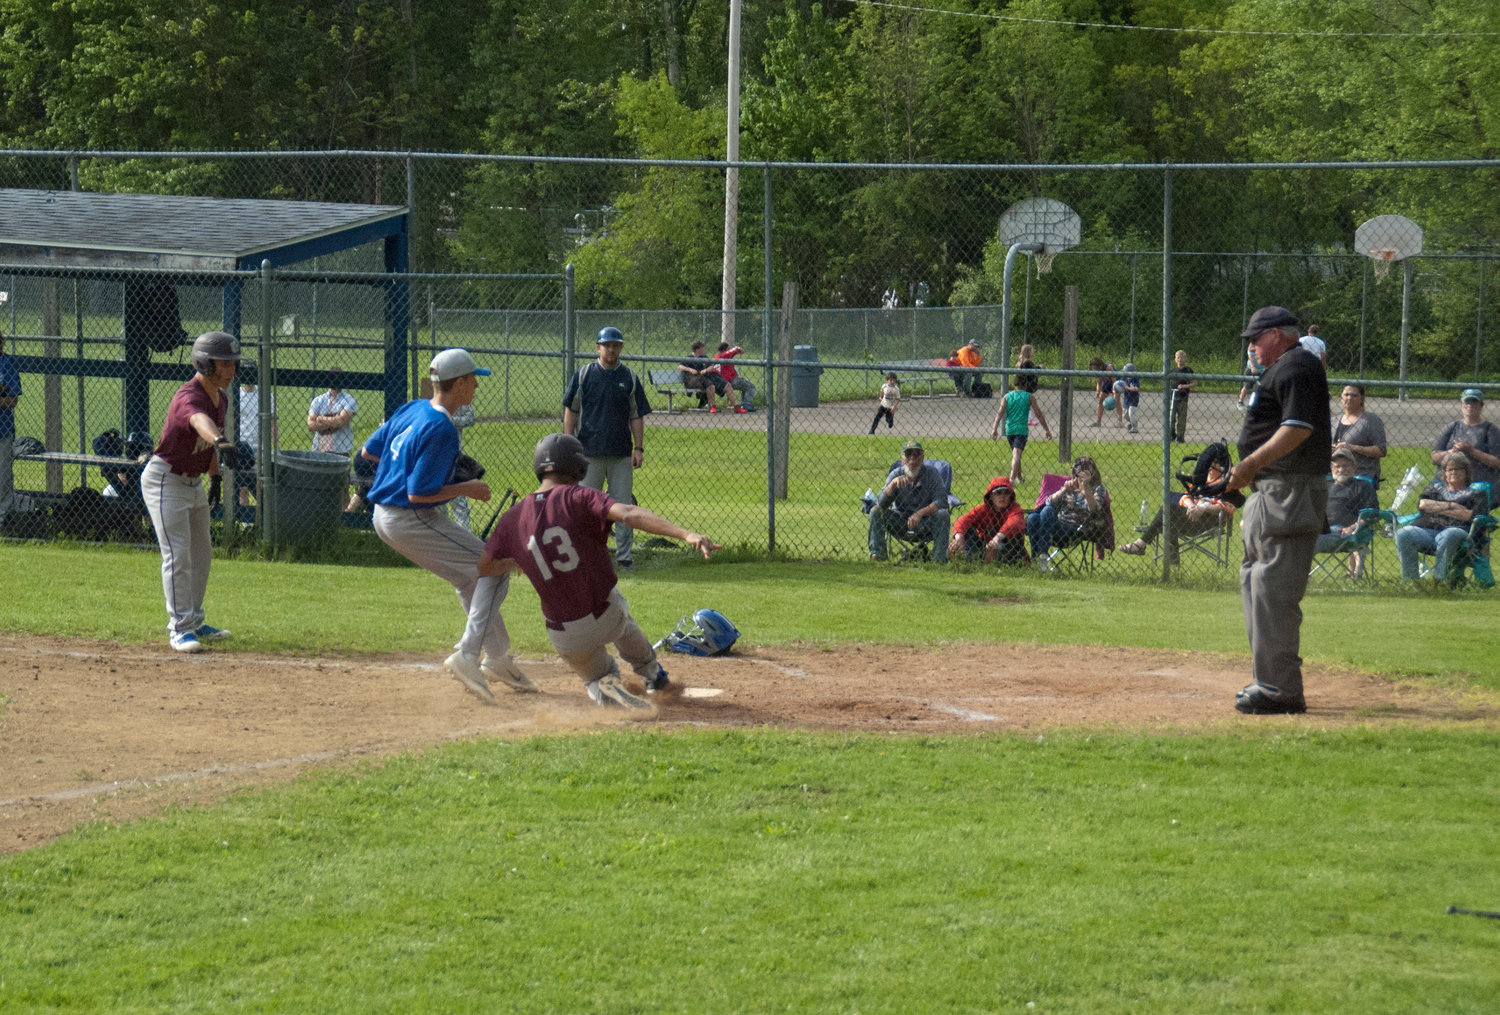 Wildcat Daniel Tolbert slides safely into home plate after advancing on a passed ball.